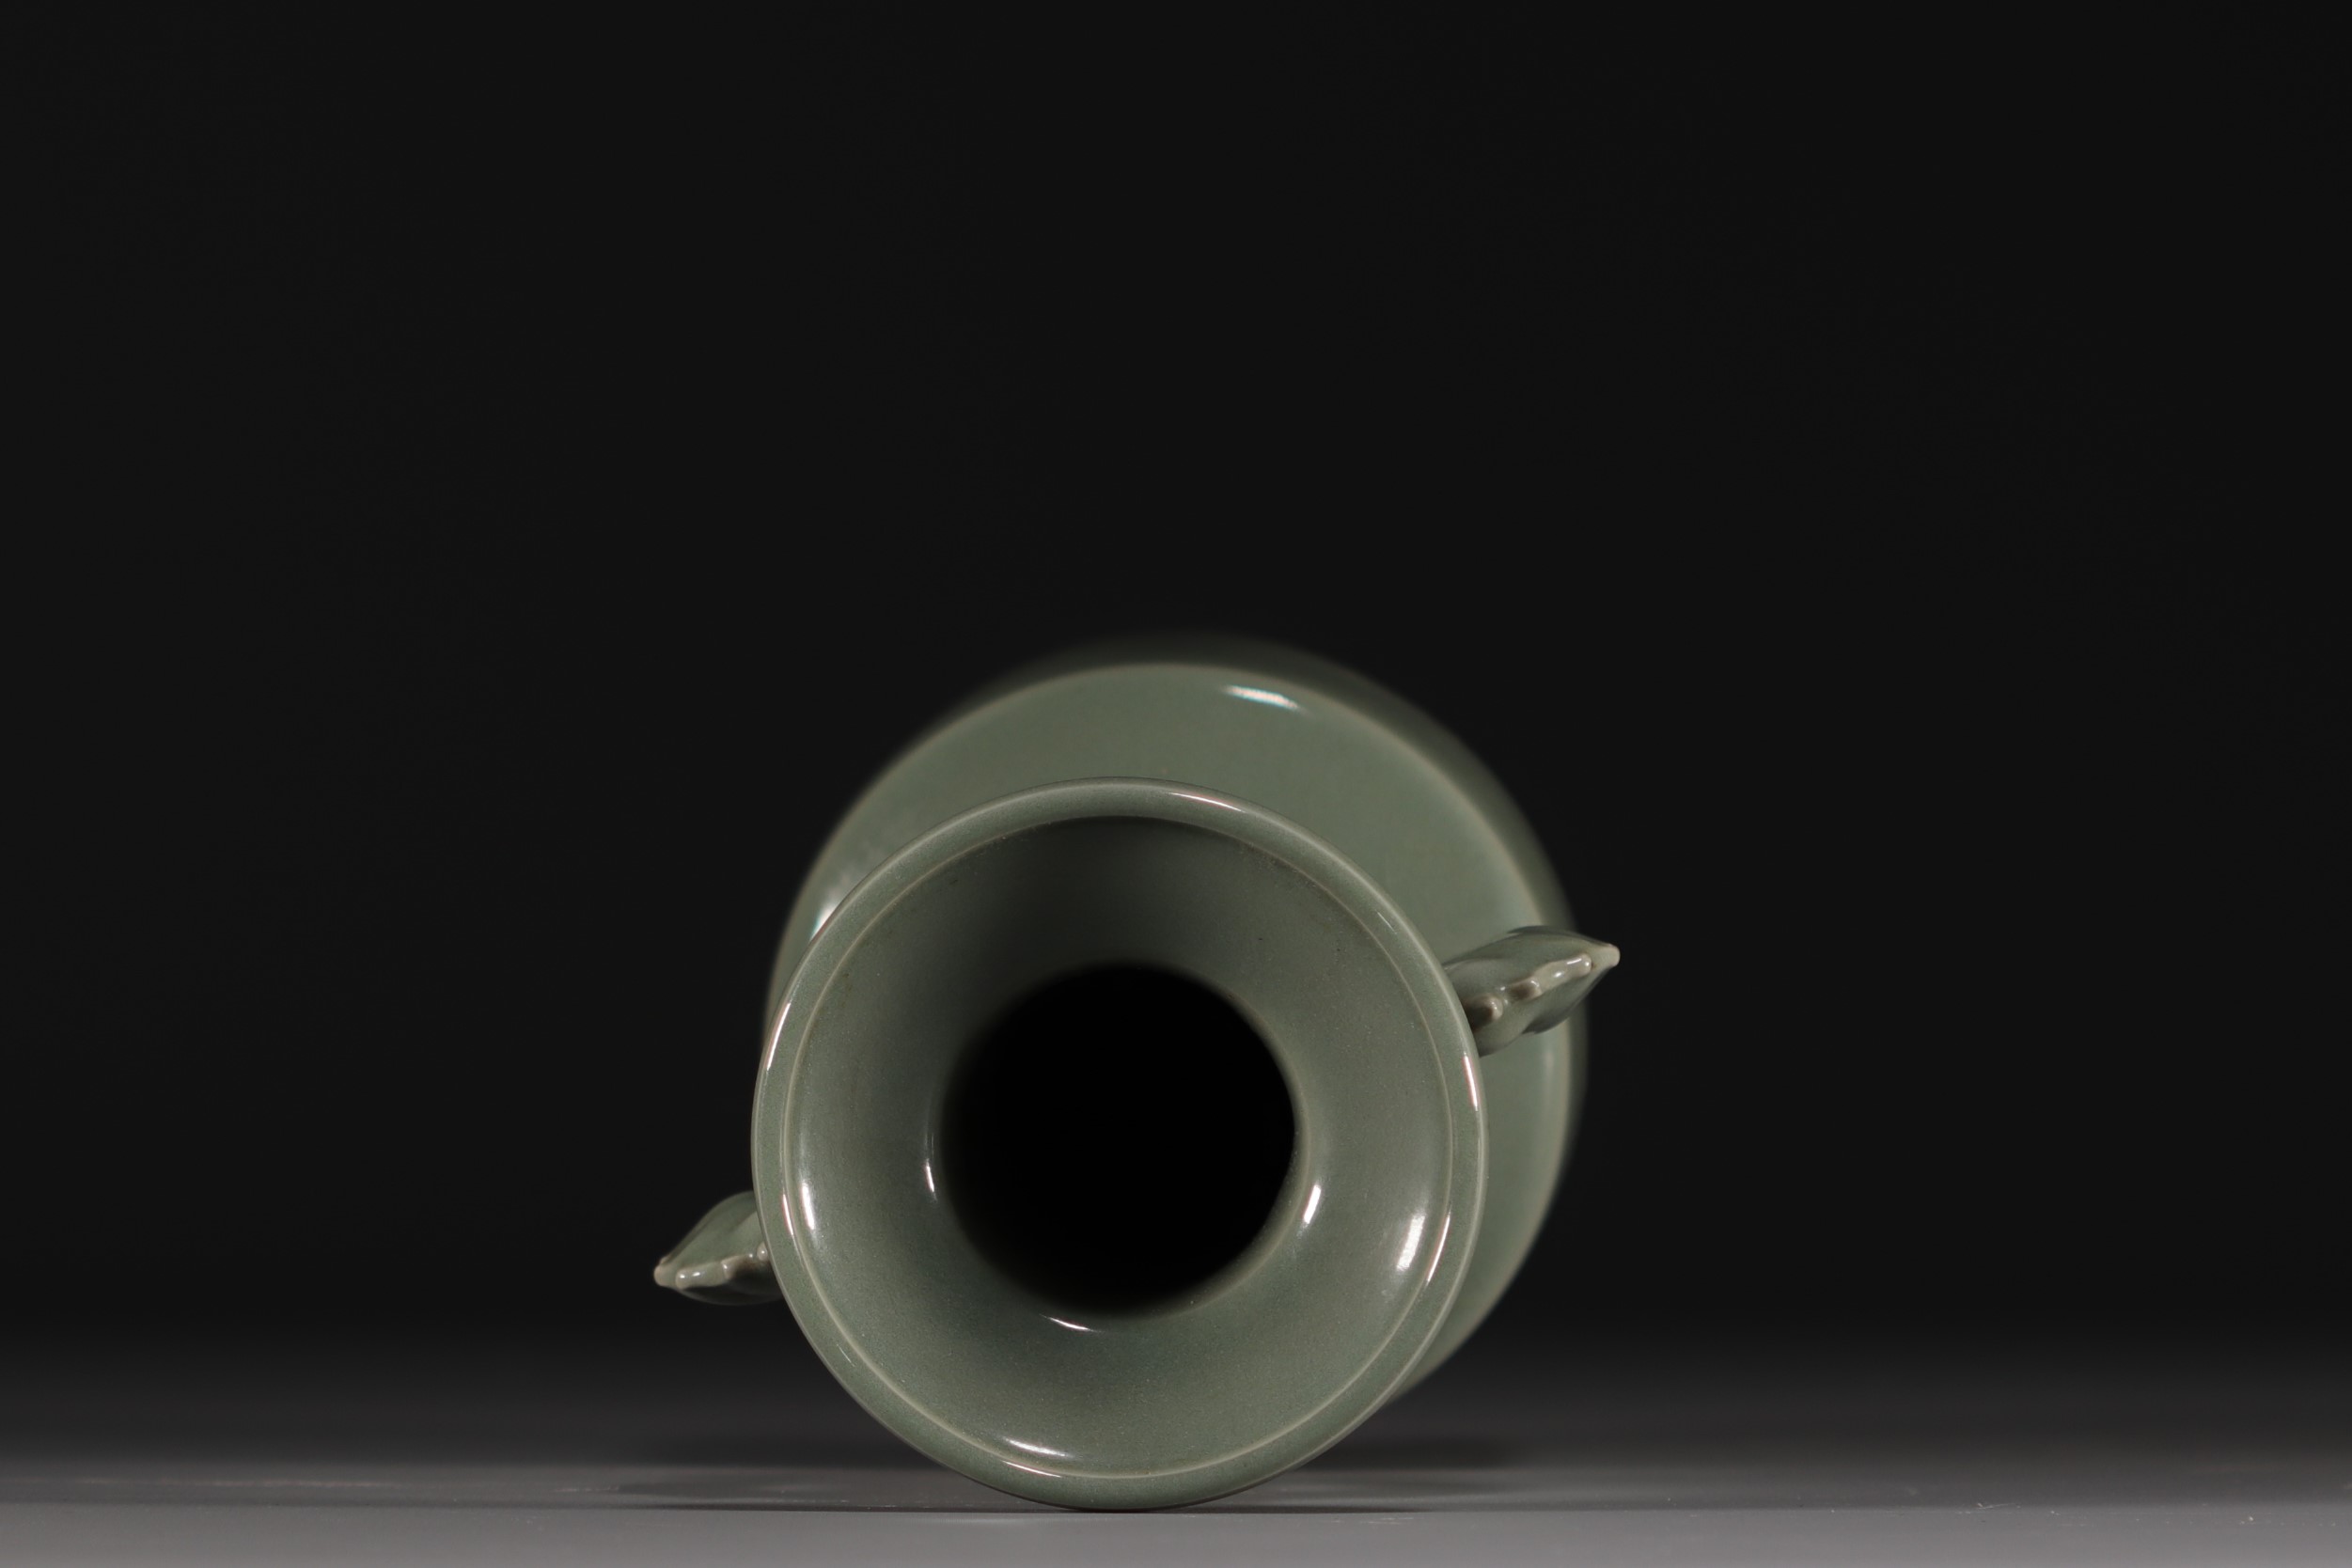 China - A green-glazed monochrome porcelain vase with fish-shaped handles, Qing period. - Image 5 of 5